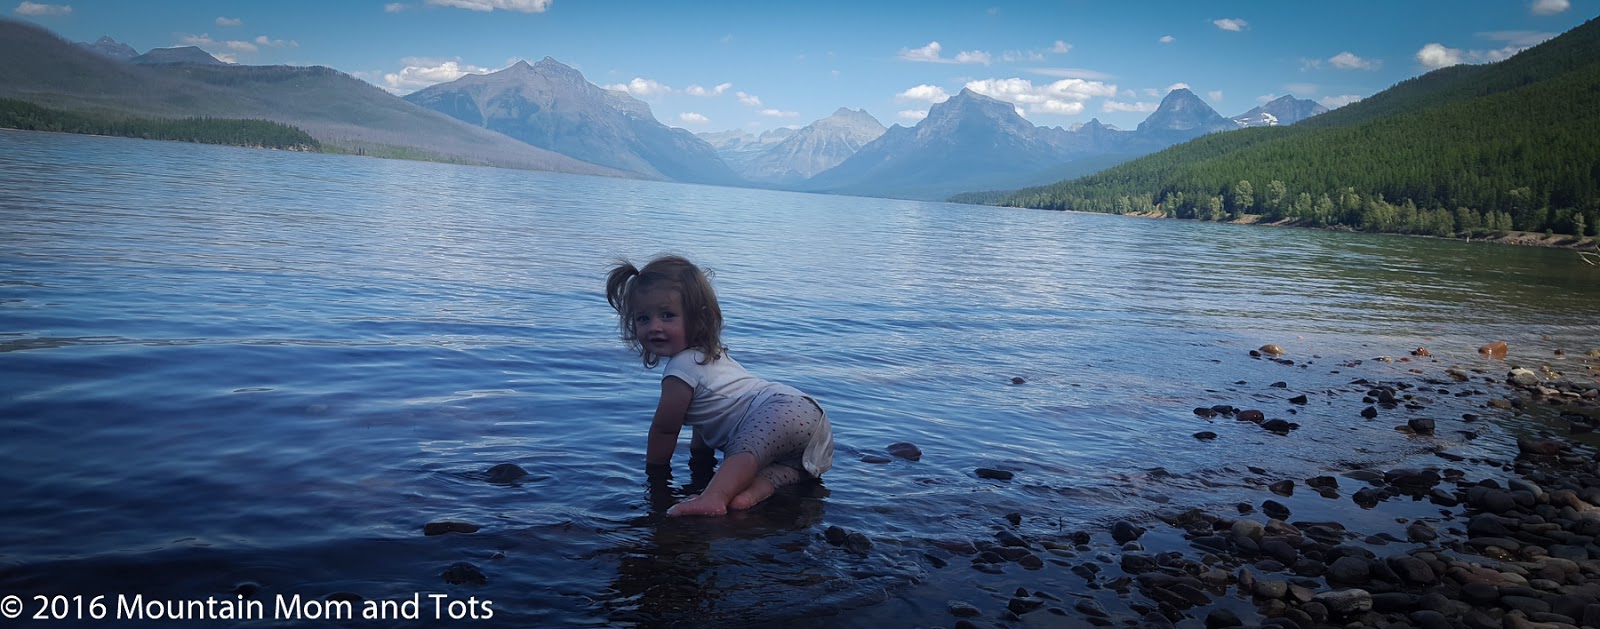 Baby L in Lake McDonald. Glacier-less mountains in the distance.